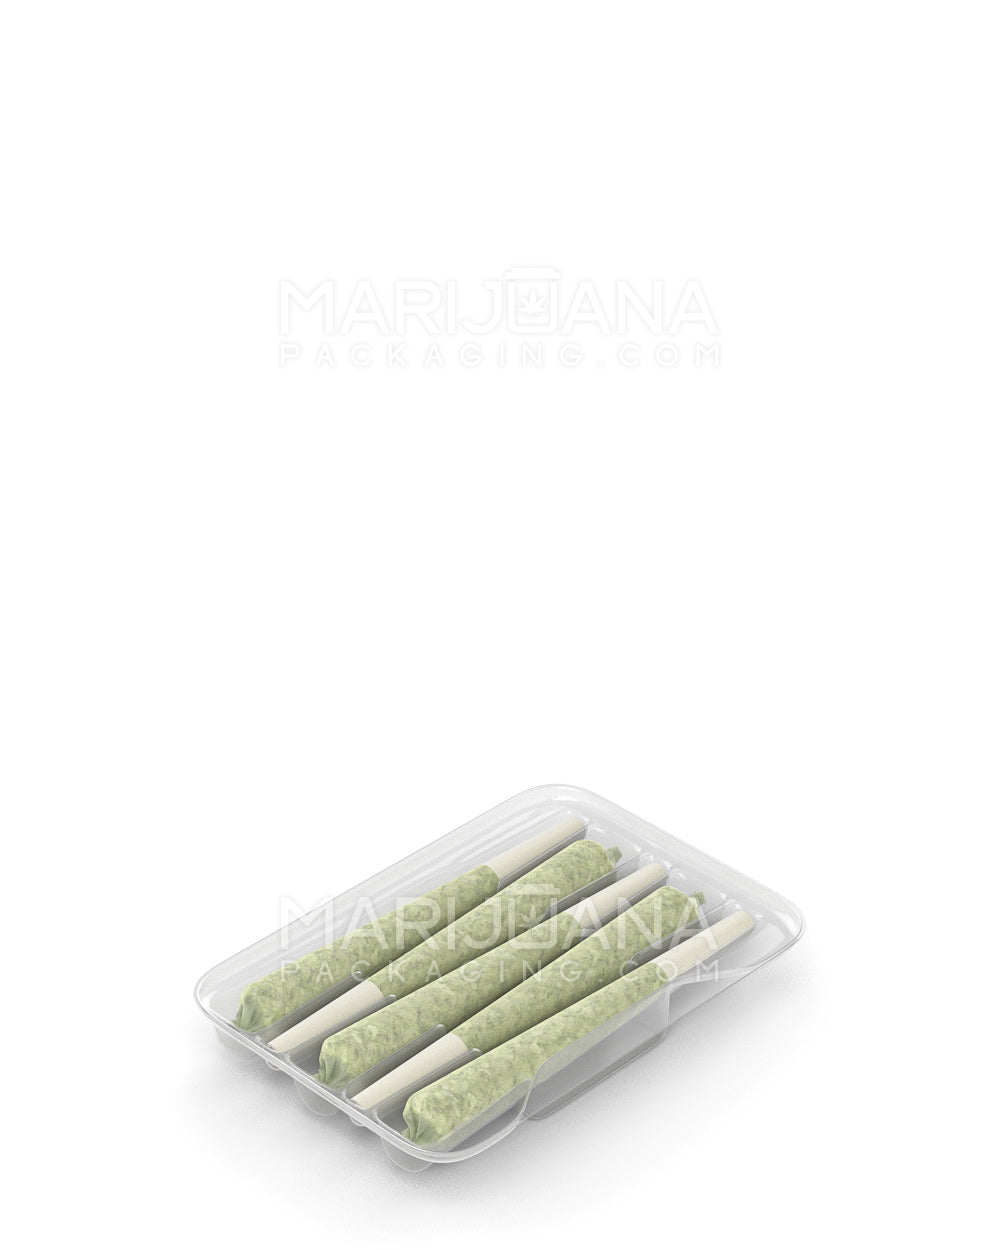 Edible & Joint Box Insert Tray for 5 Mini Pre Rolled Cones | 70mm - Clear Plastic - 100 Count - 2